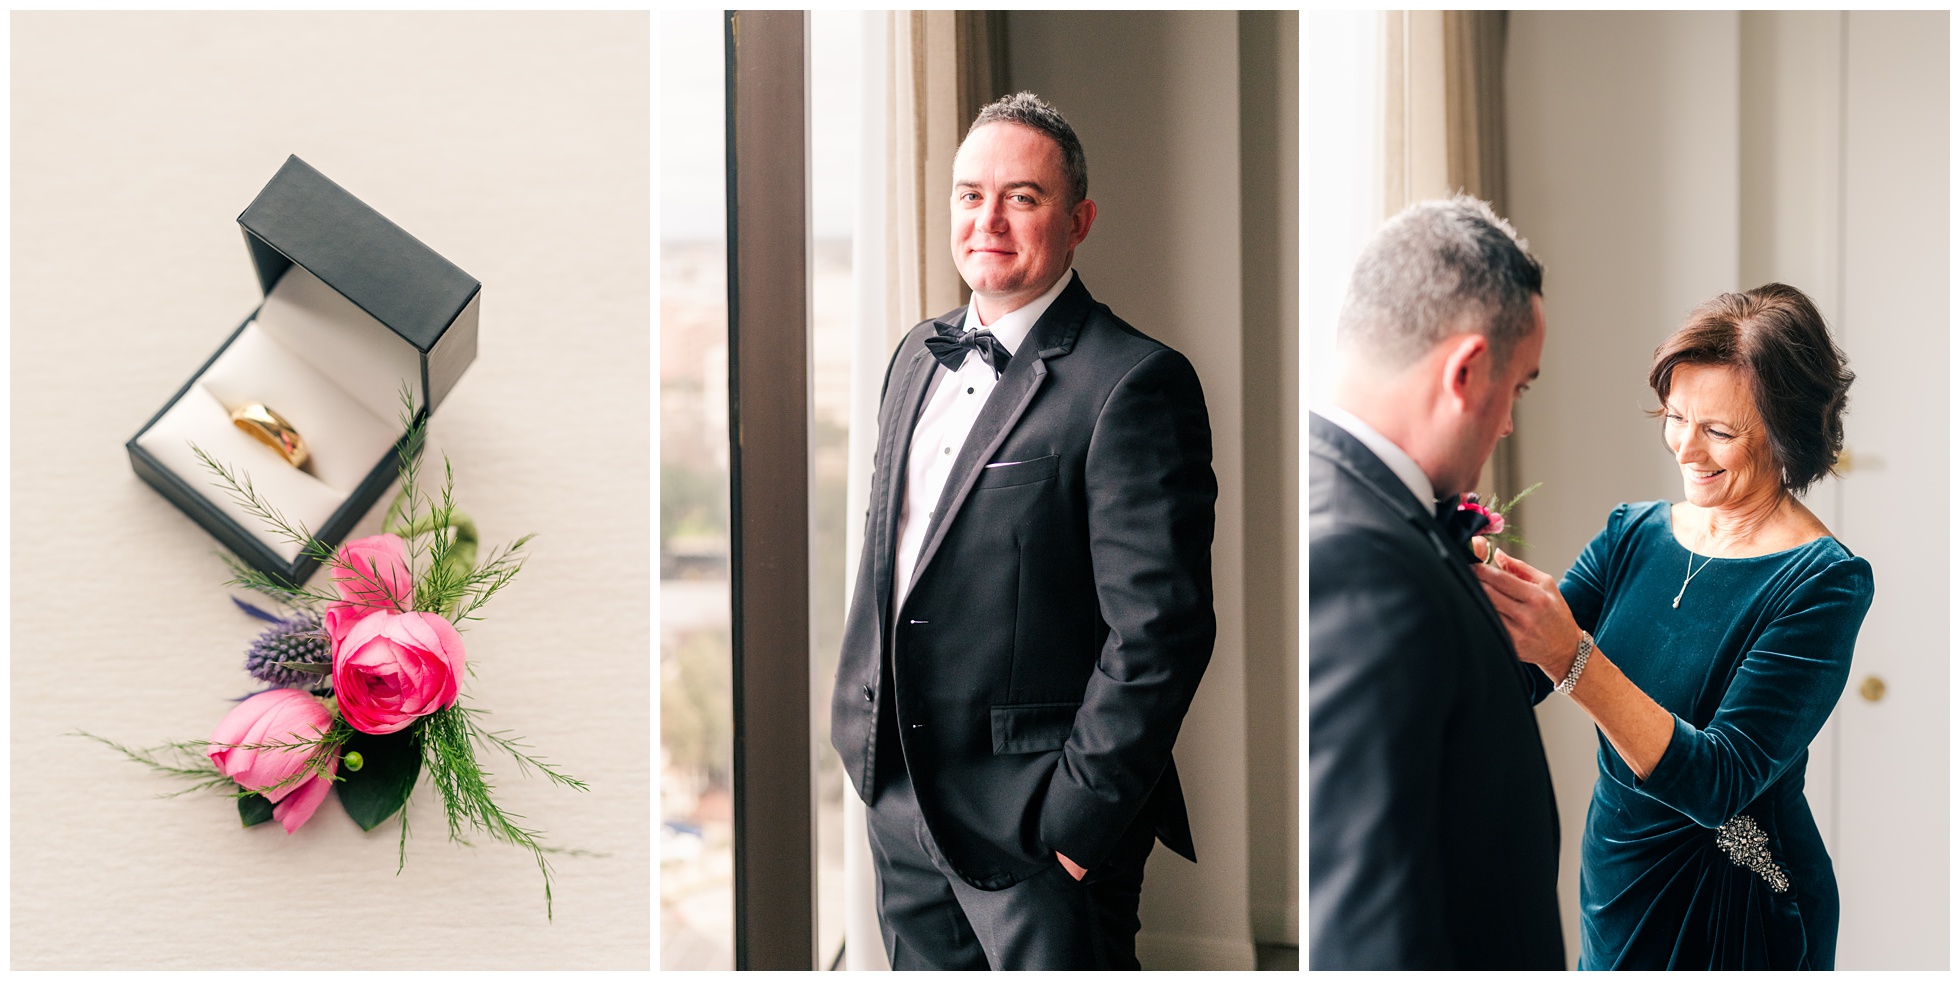 Groom's details, portrait, and his mom before the wedding at C.Baldwin.